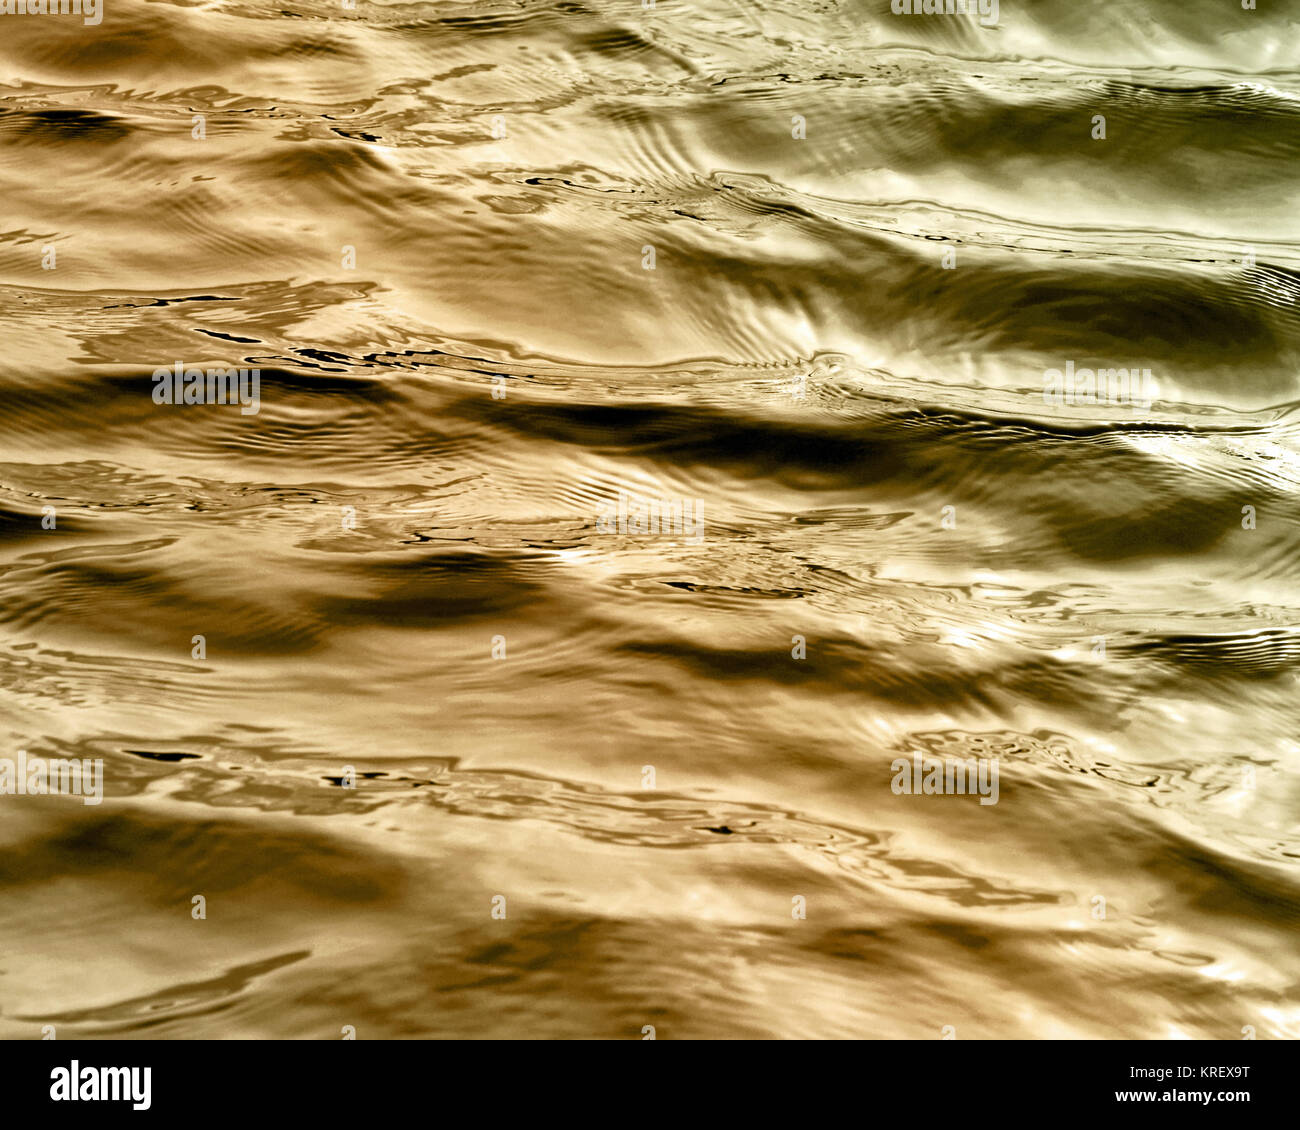 Beautiful waters with soft ripples on surface in shades of Gold Stock Photo